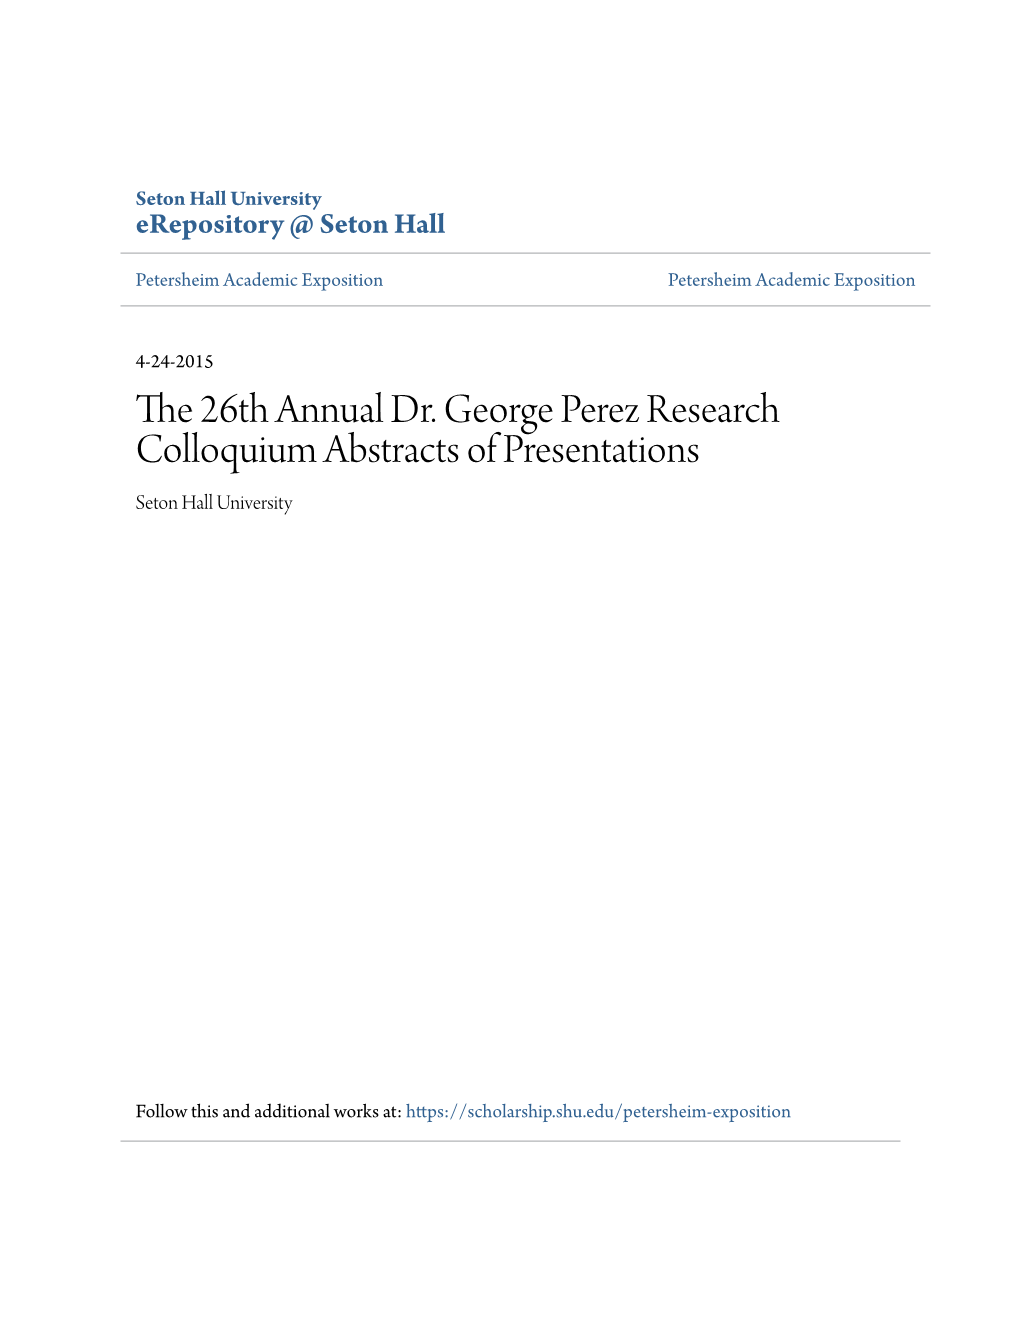 The 26Th Annual Dr. George Perez Research Colloquium Abstracts of Presentations Seton Hall University